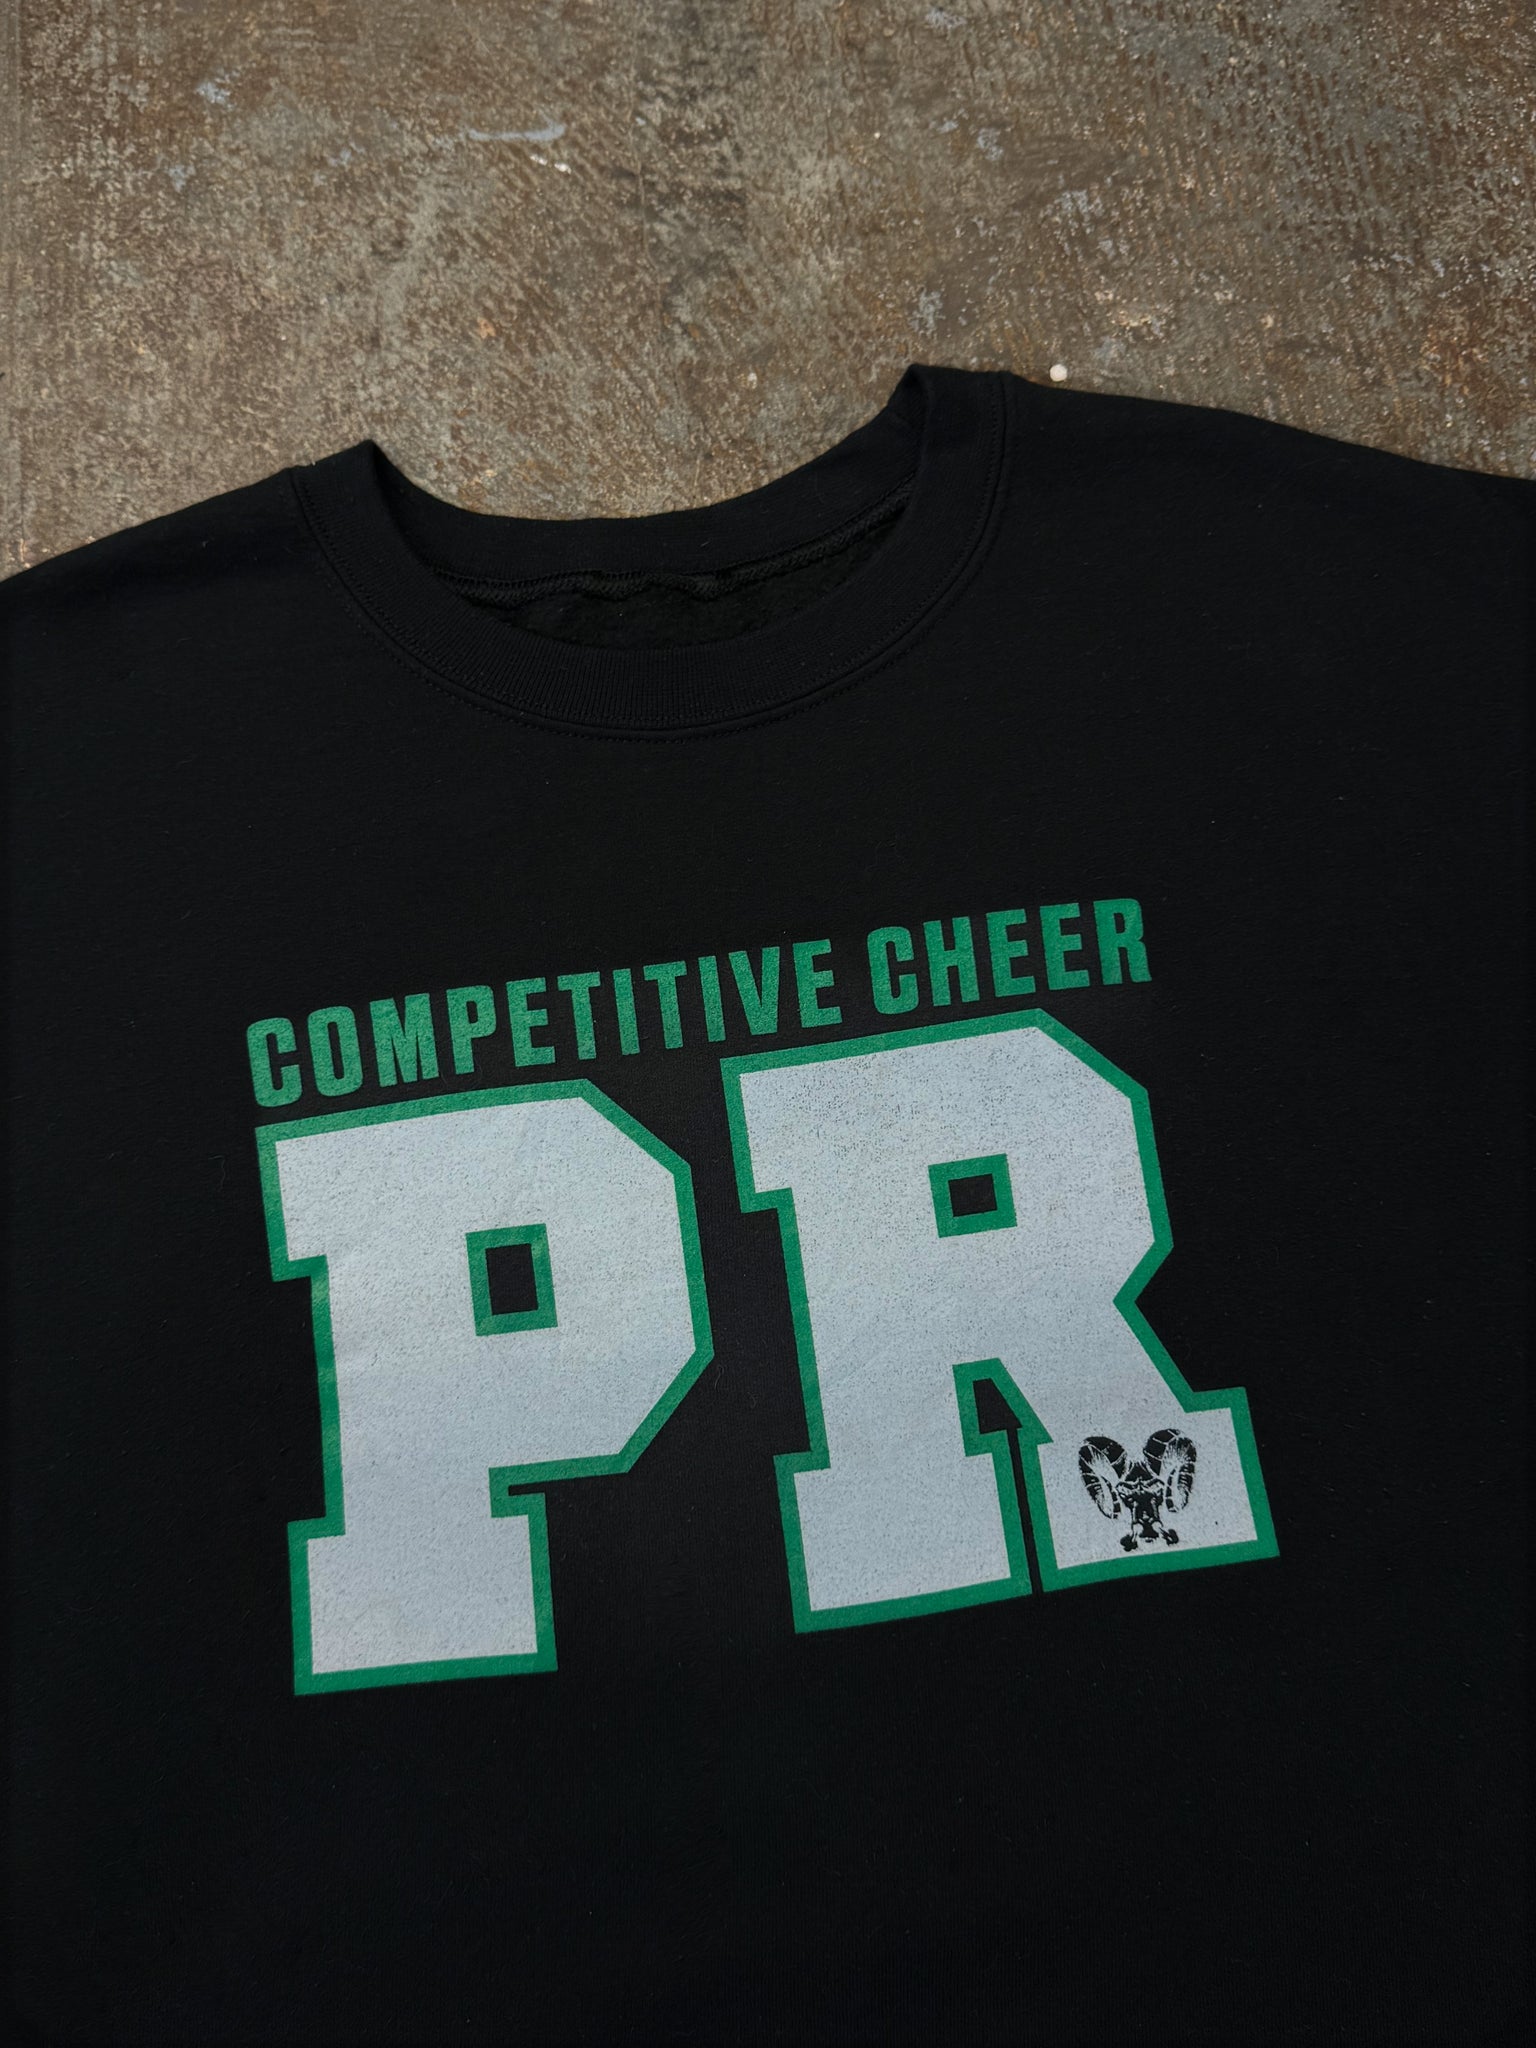 COMPETITIVE CHEER SWEATER